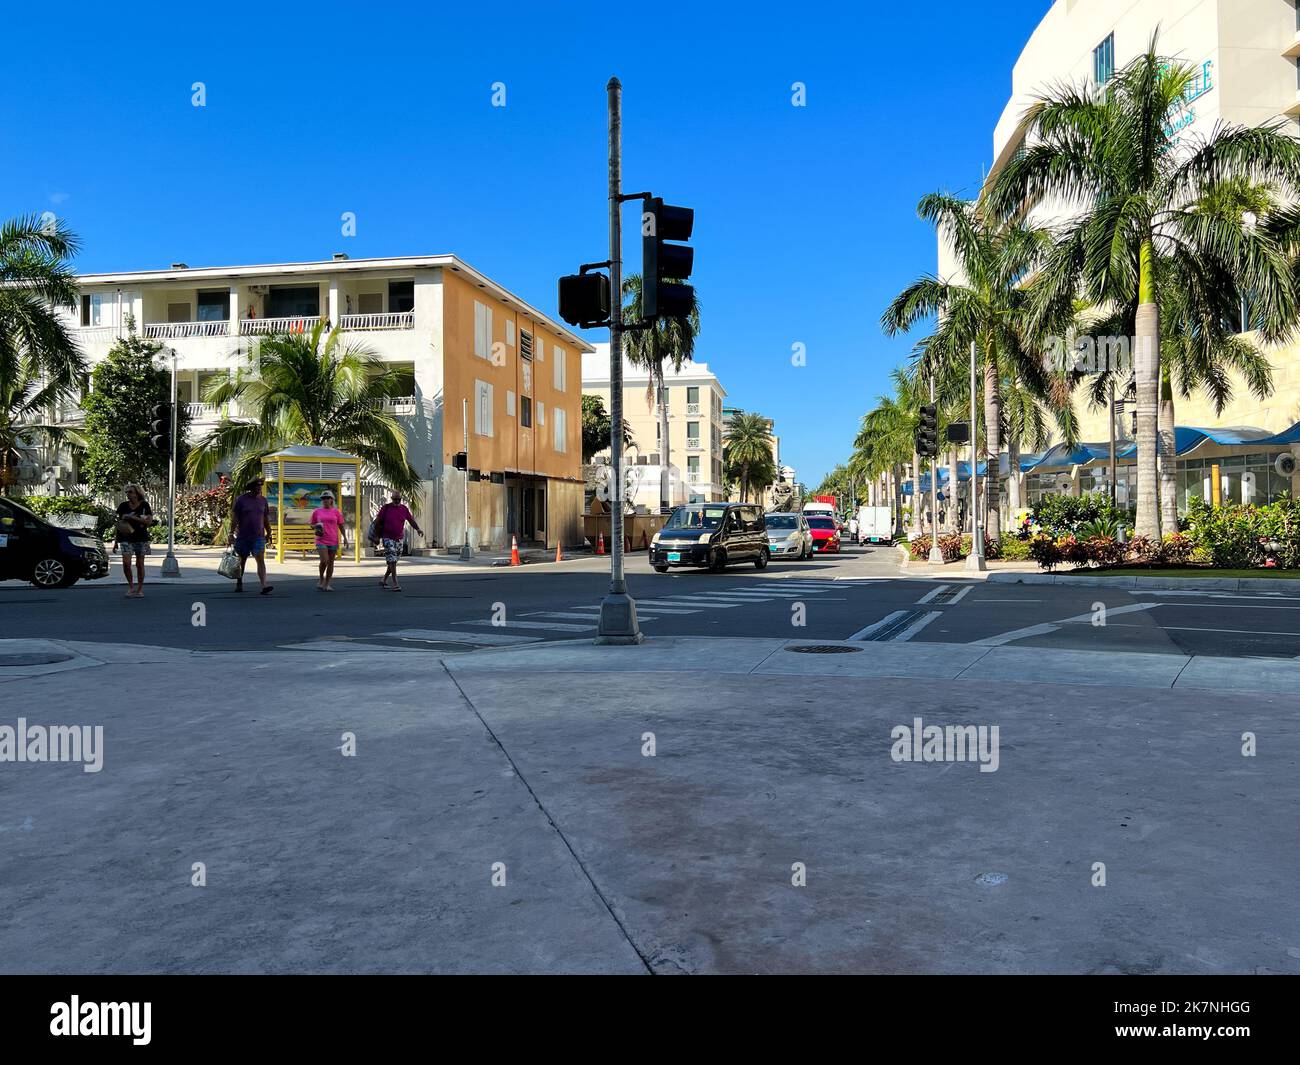 Nassau, Bahamas - December 9, 2021:  A typical street in downtown Nassau, Bahamas on a sunny day. Stock Photo